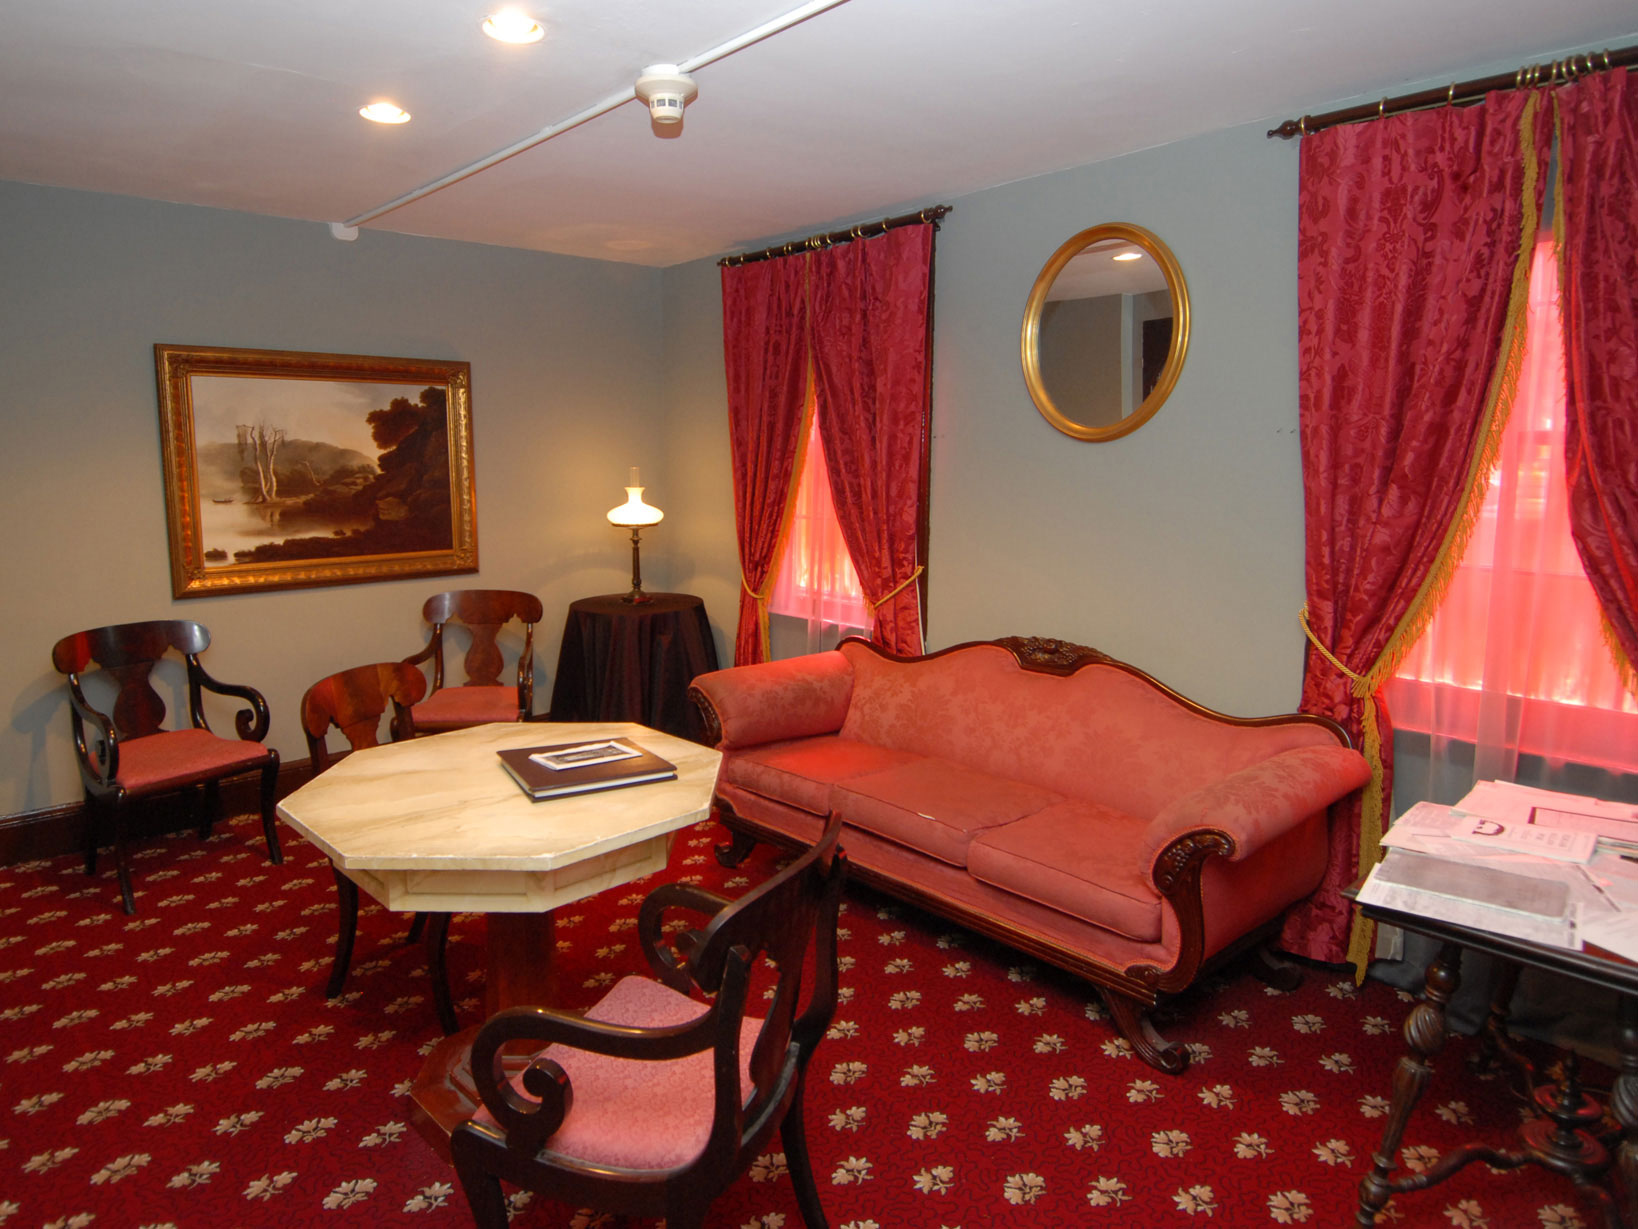 A small red-carpeted room with faux marble table, red upholstered chairs and sofa, and red curtains.